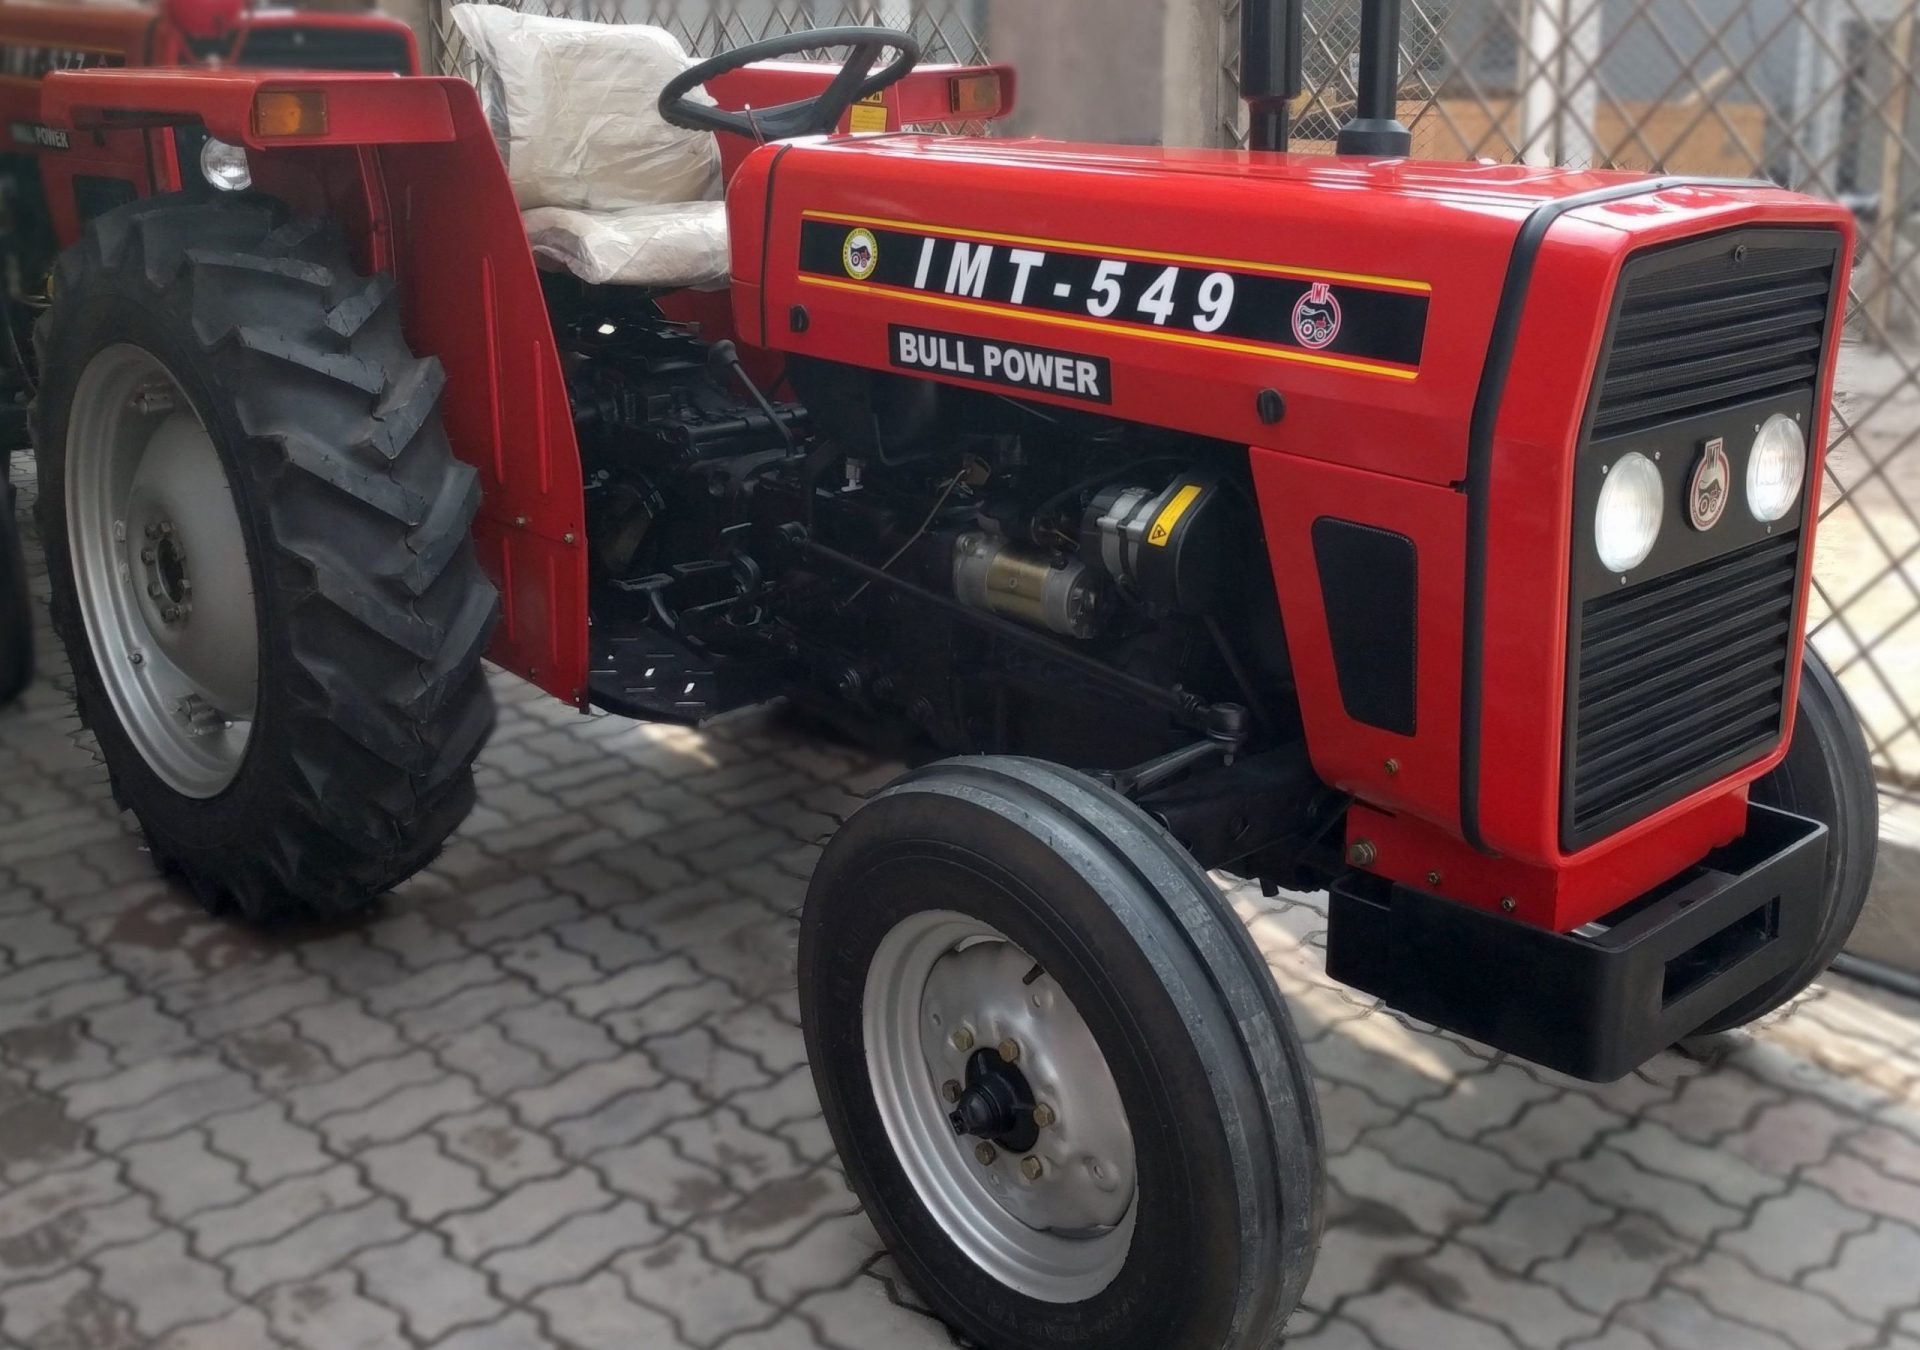 IMT 549 Tractor Price in Pakistan 2022